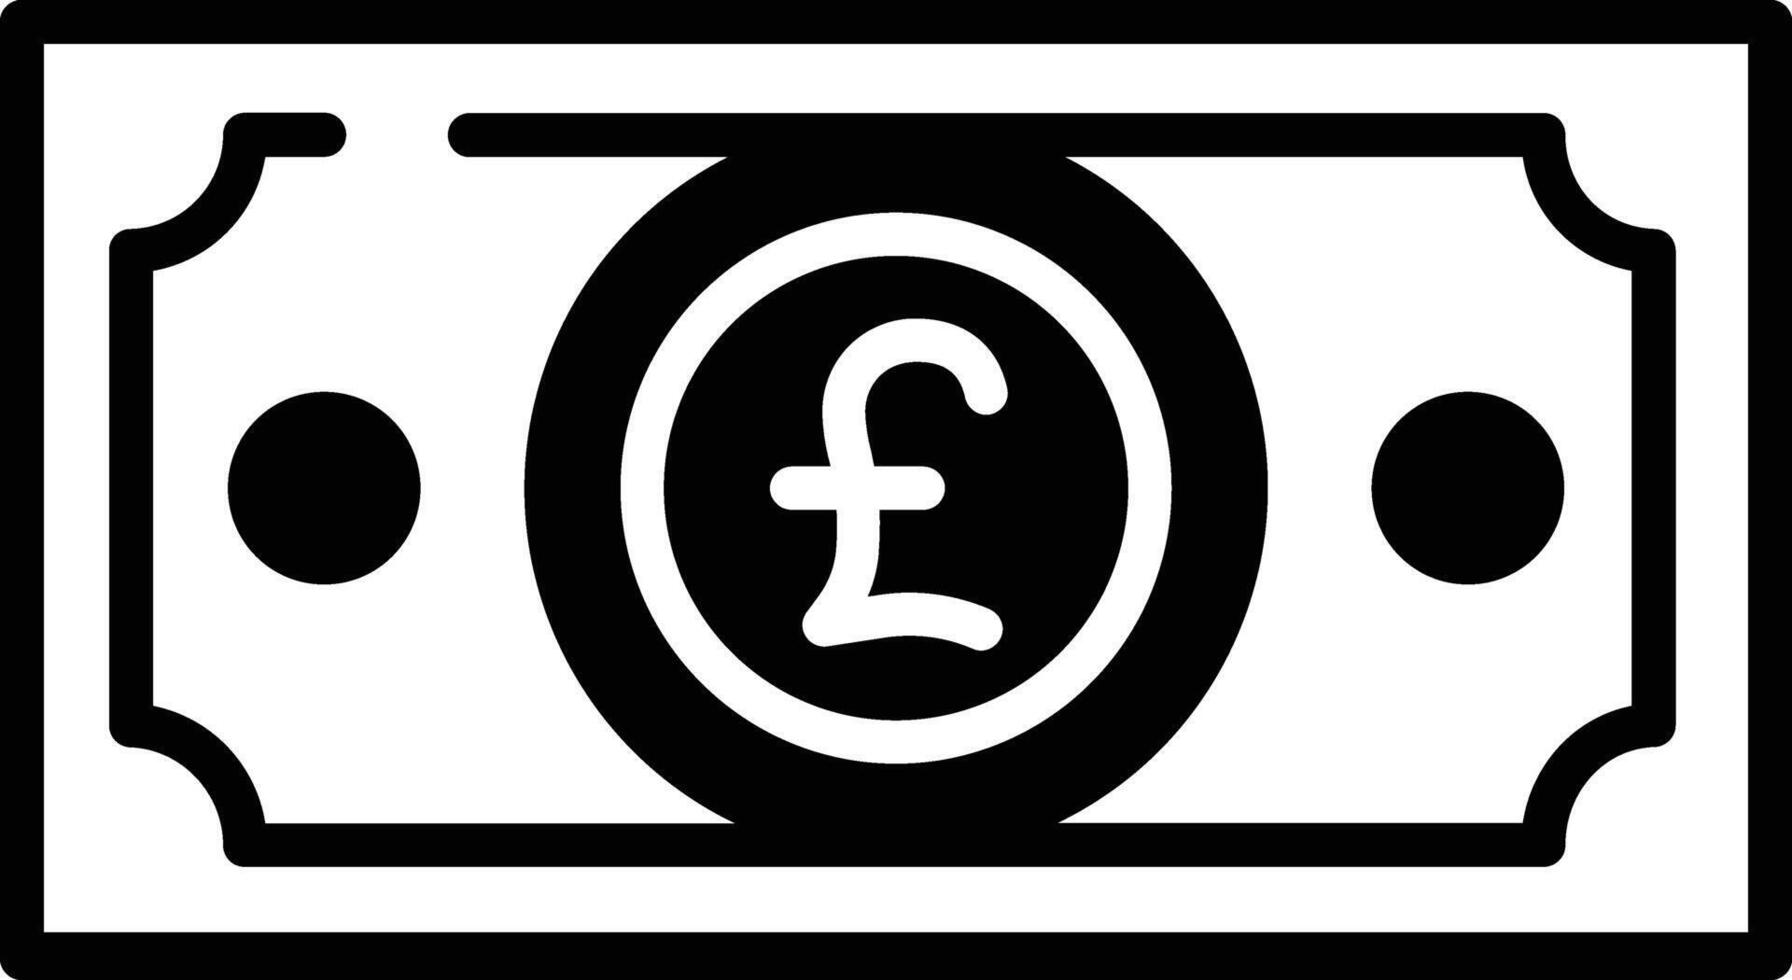 Pound glyph and line vector illustration